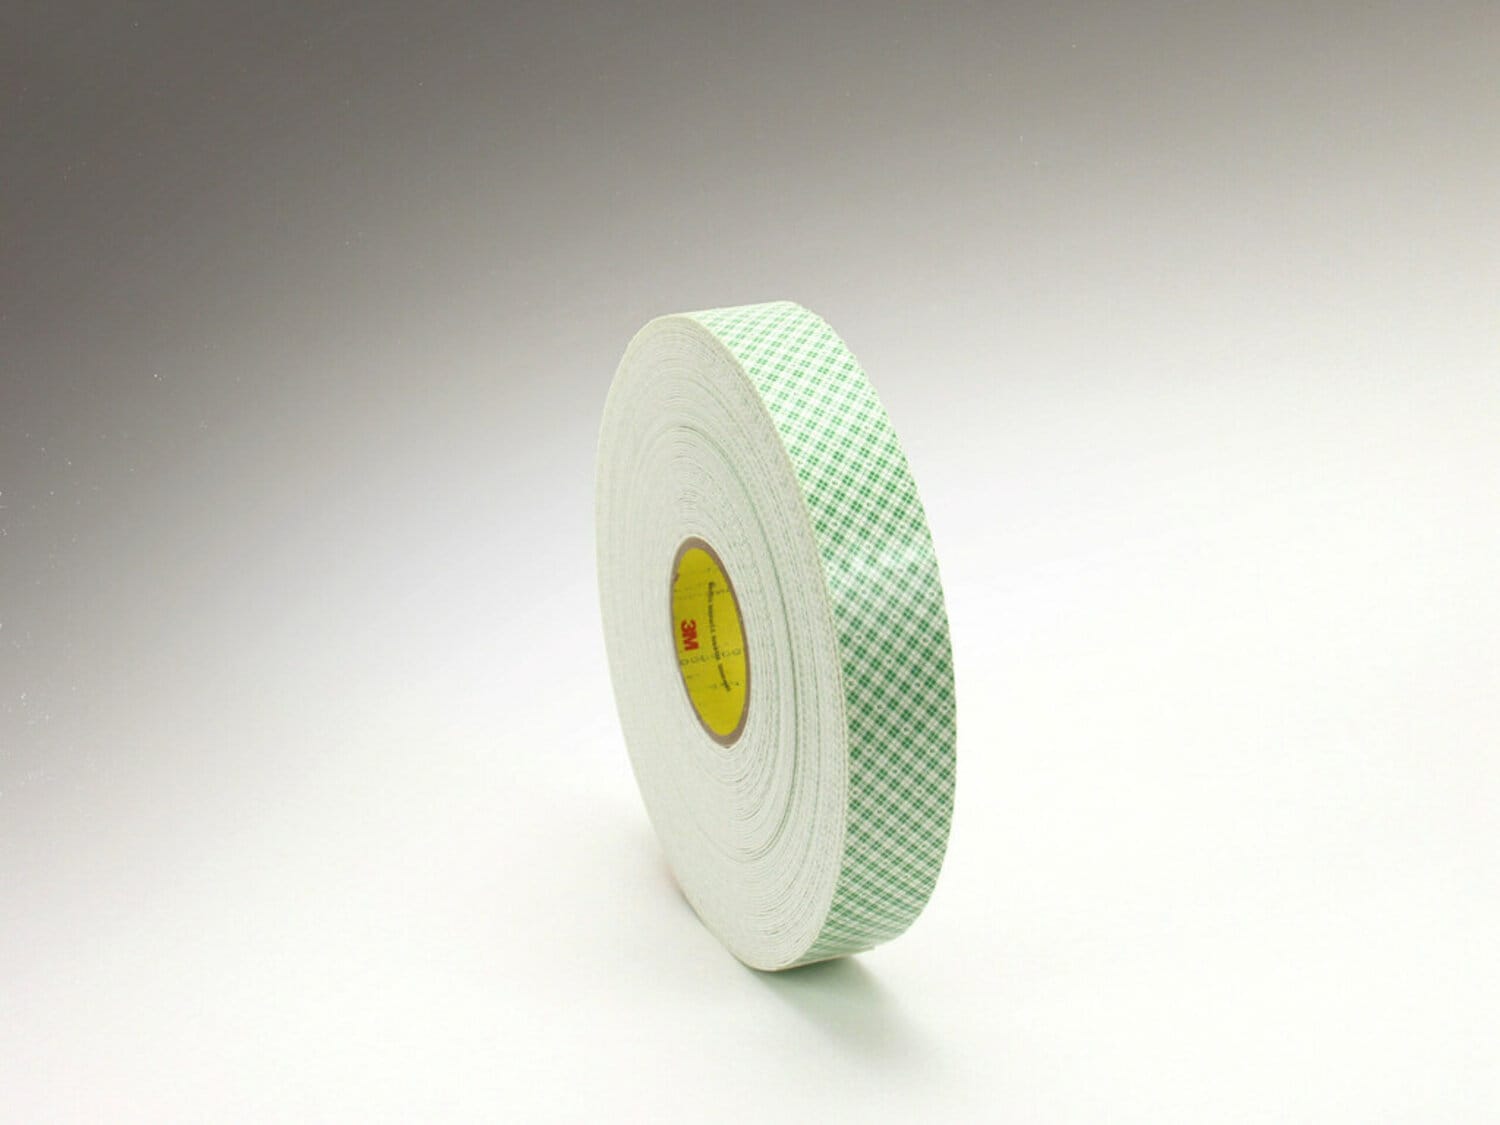 7100008964 - 3M Double Coated Urethane Foam Tape 4016, Off White, 2 in x 36 yd, 62
mil, 6 rolls per case